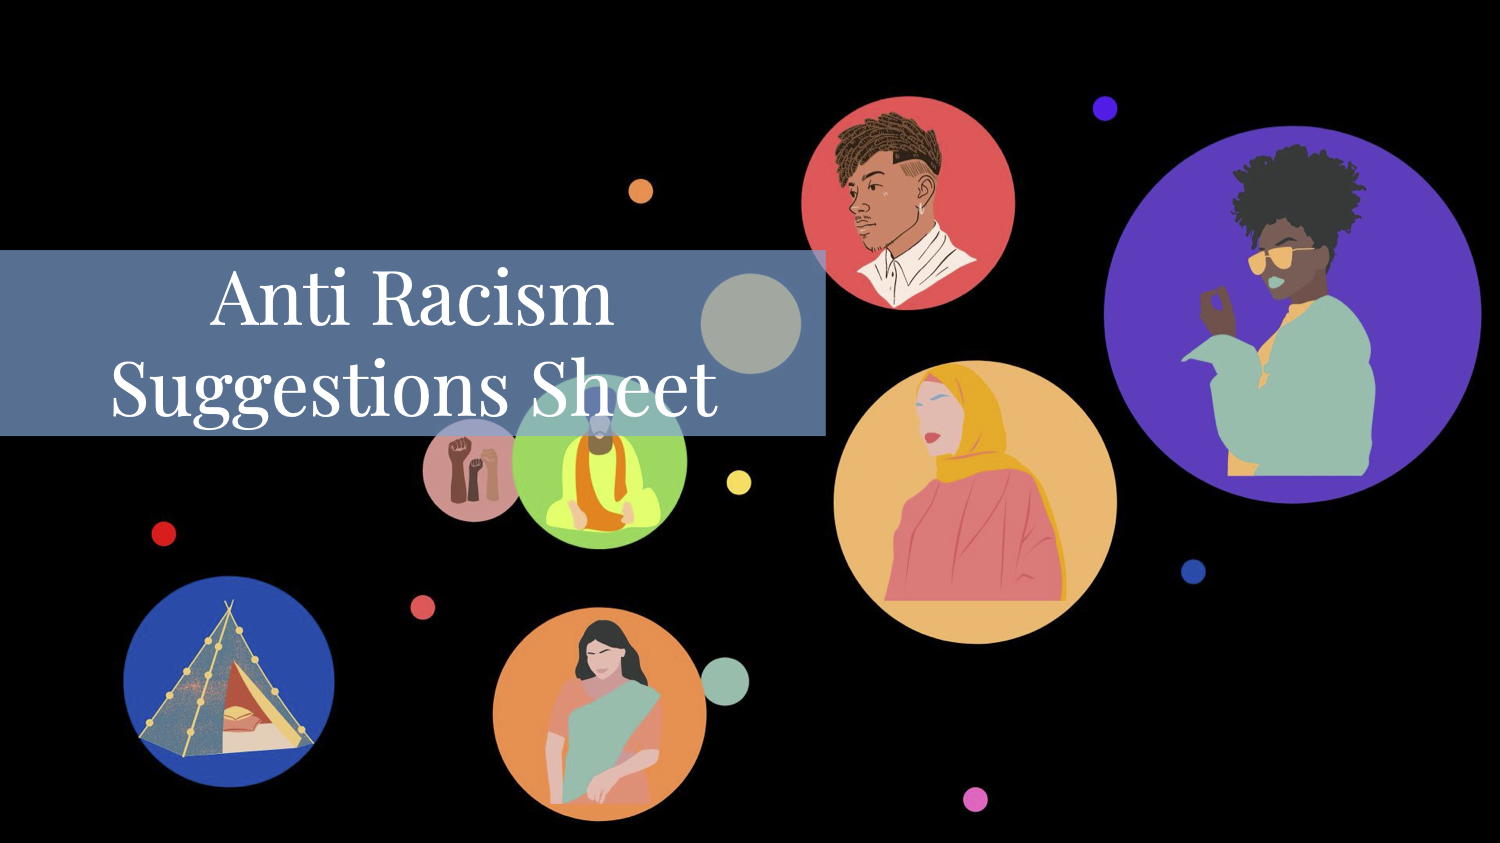 Anti-Racism Suggestions Sheet